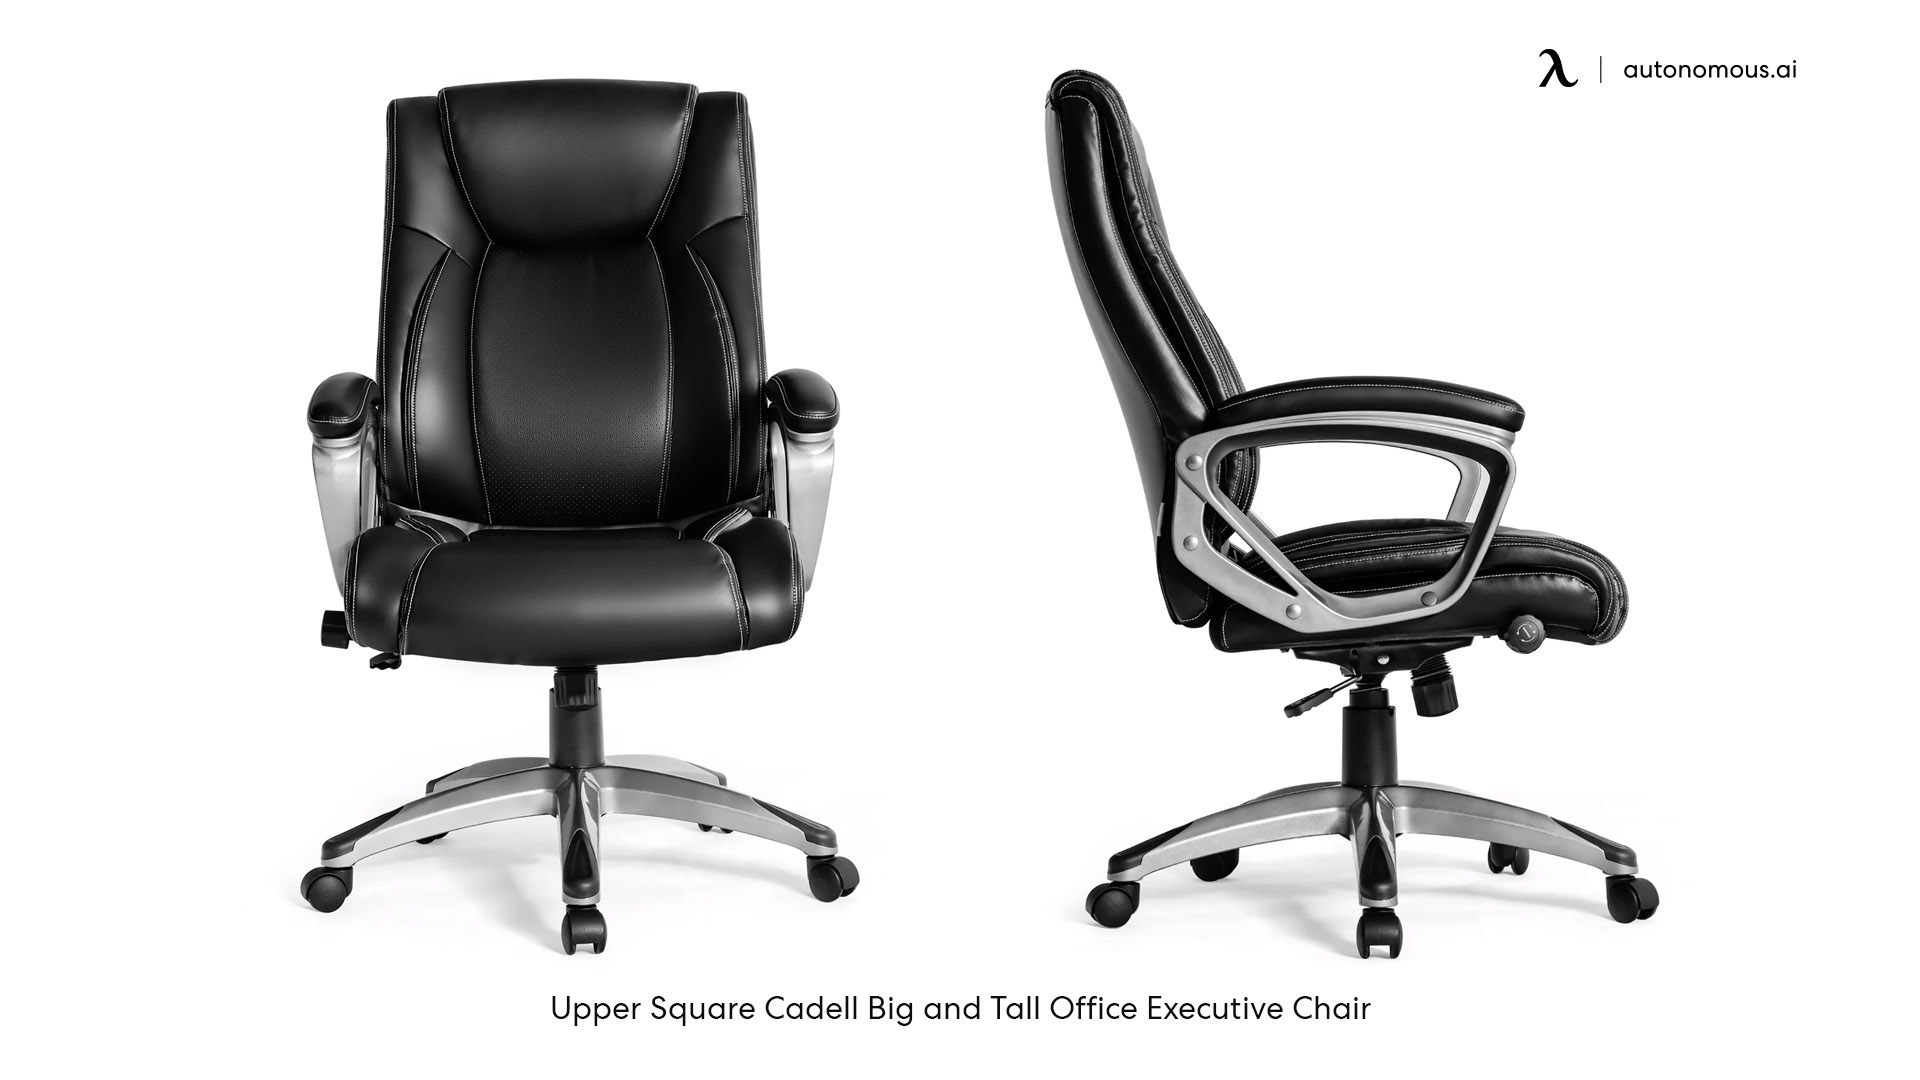 Upper Square Cadell Big and Tall Office Executive Chair